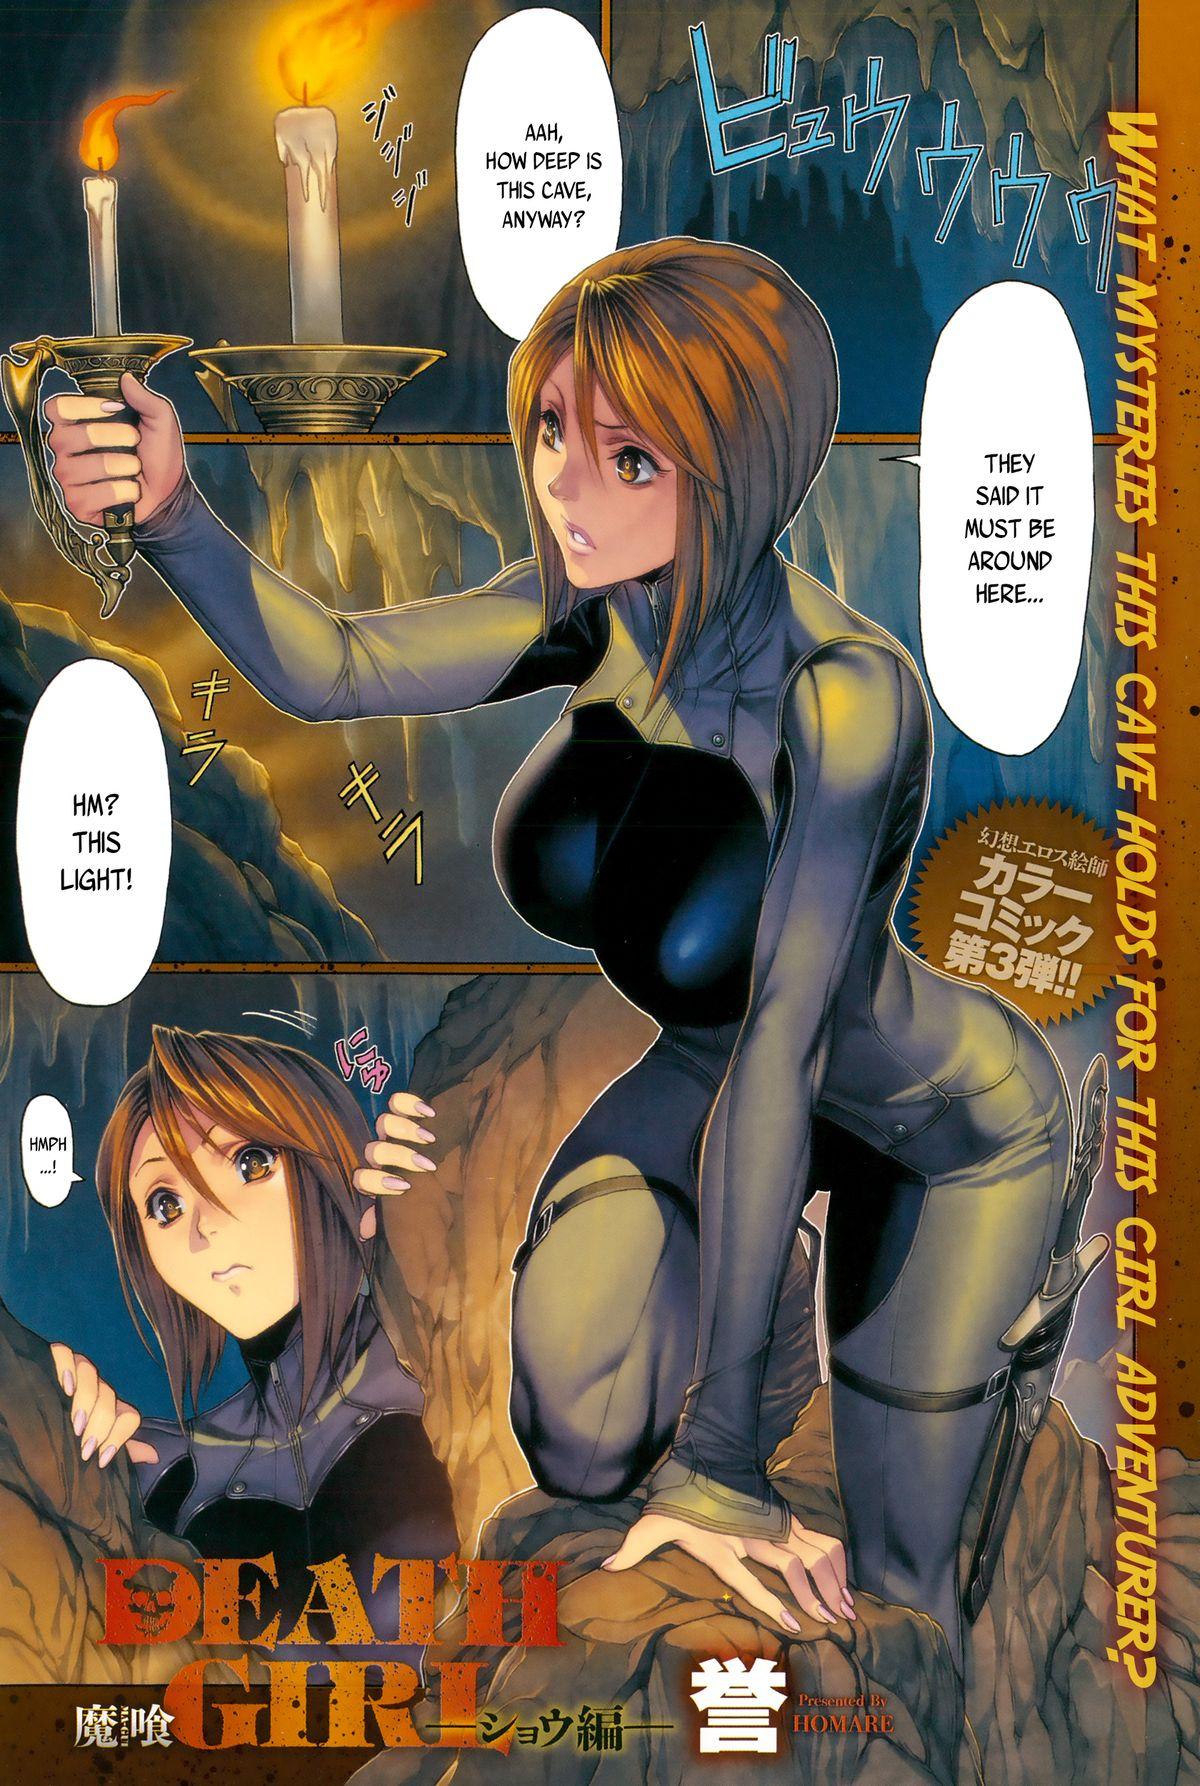 Gay Broken [Homare] Ma-Gui -DEATH GIRL- Show Hen (COMIC Anthurium 023 2015-03) [English] (Mederic64) Natural Tits - Page 2